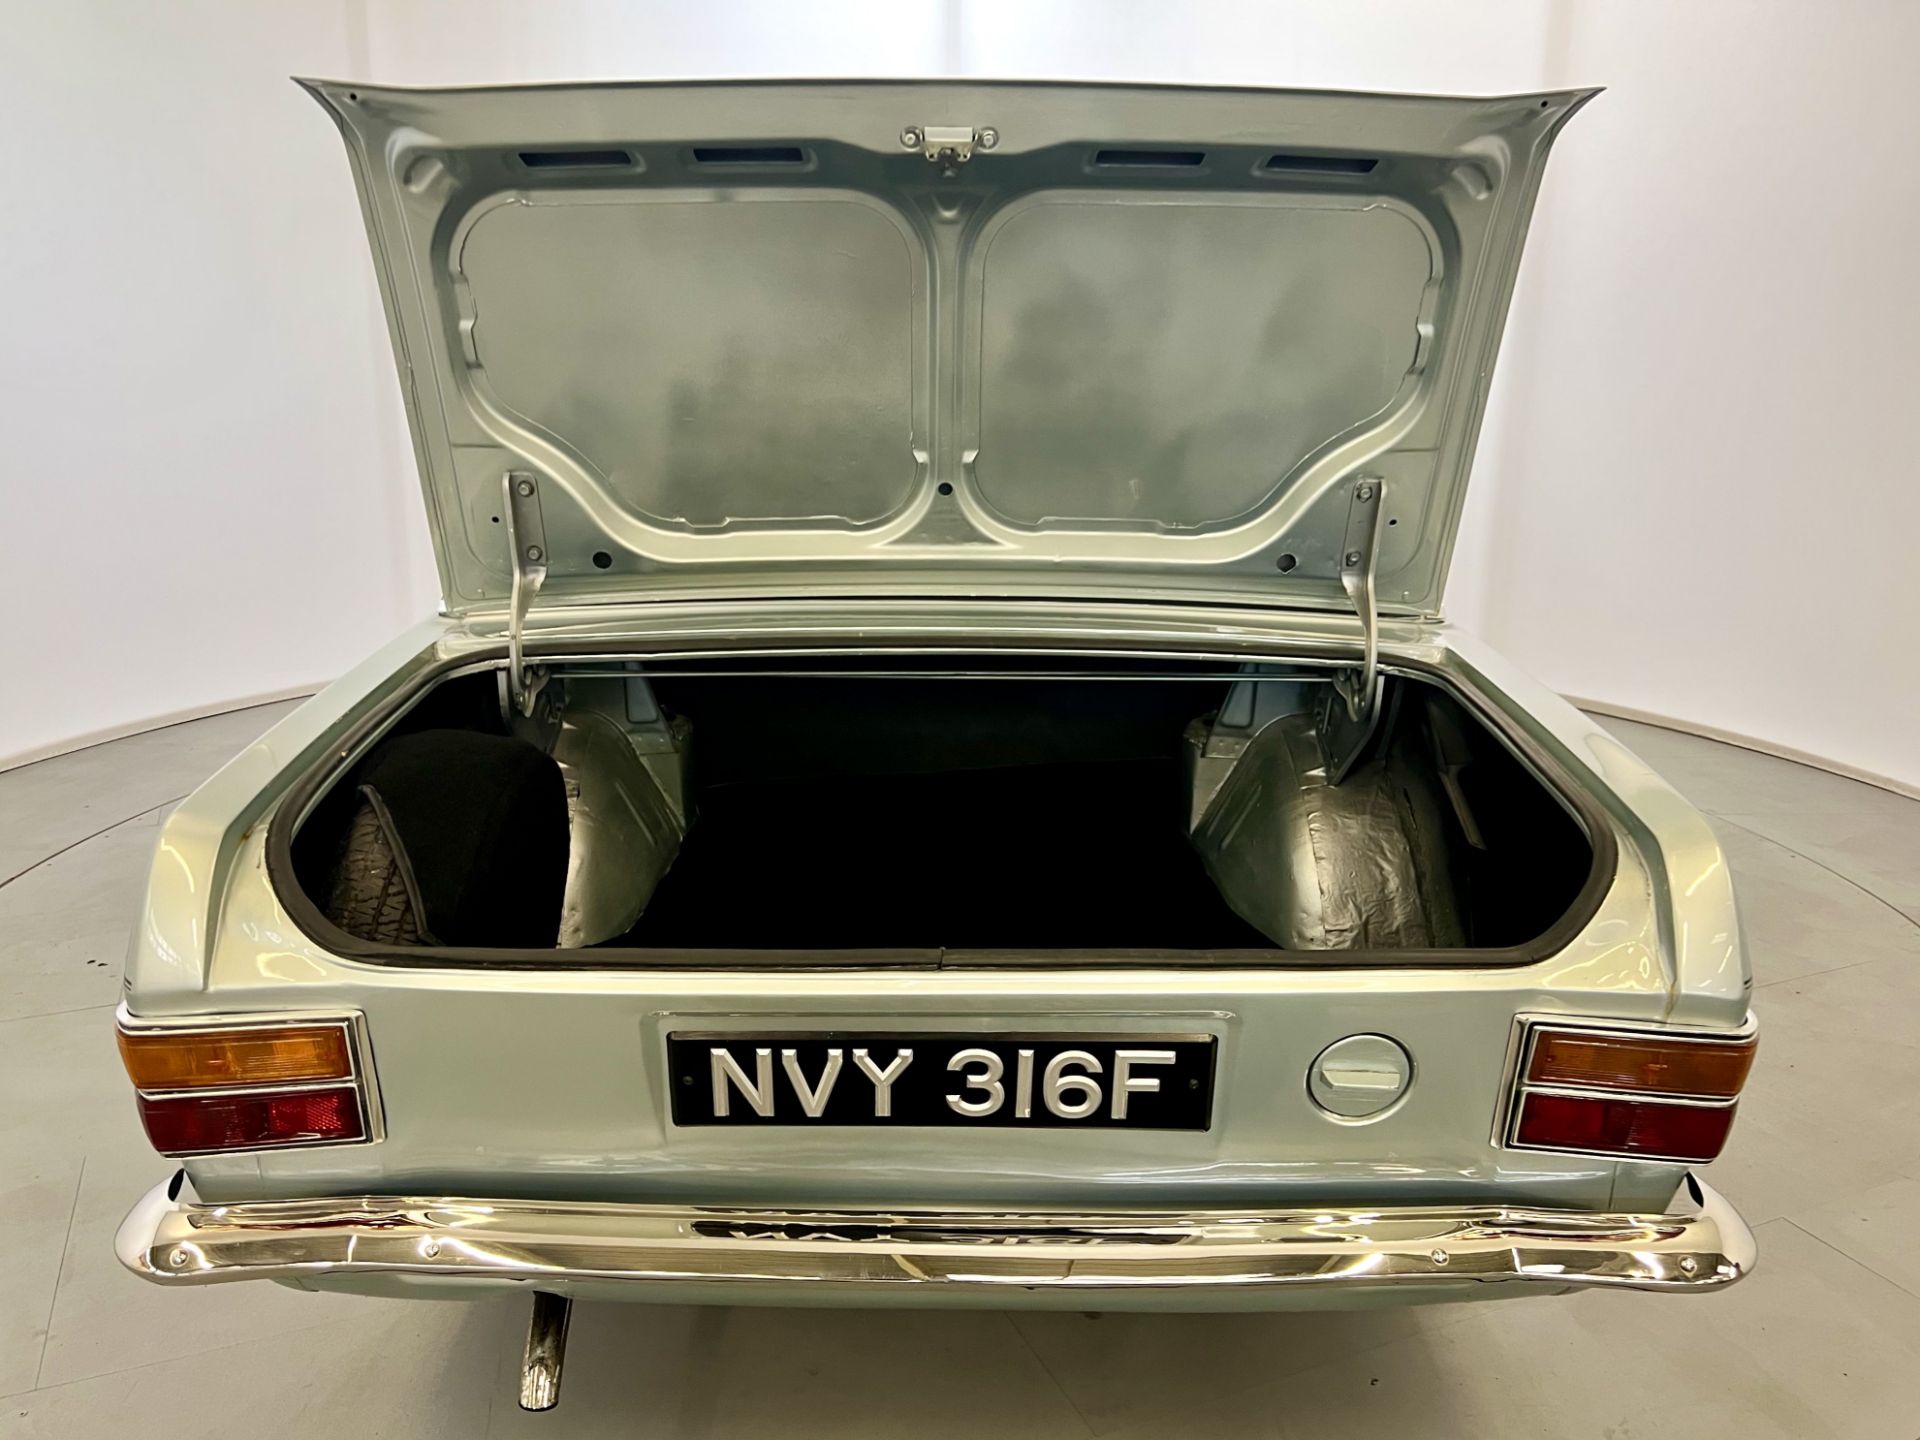 Ford Cortina 1300 DeLuxe - Image 33 of 36